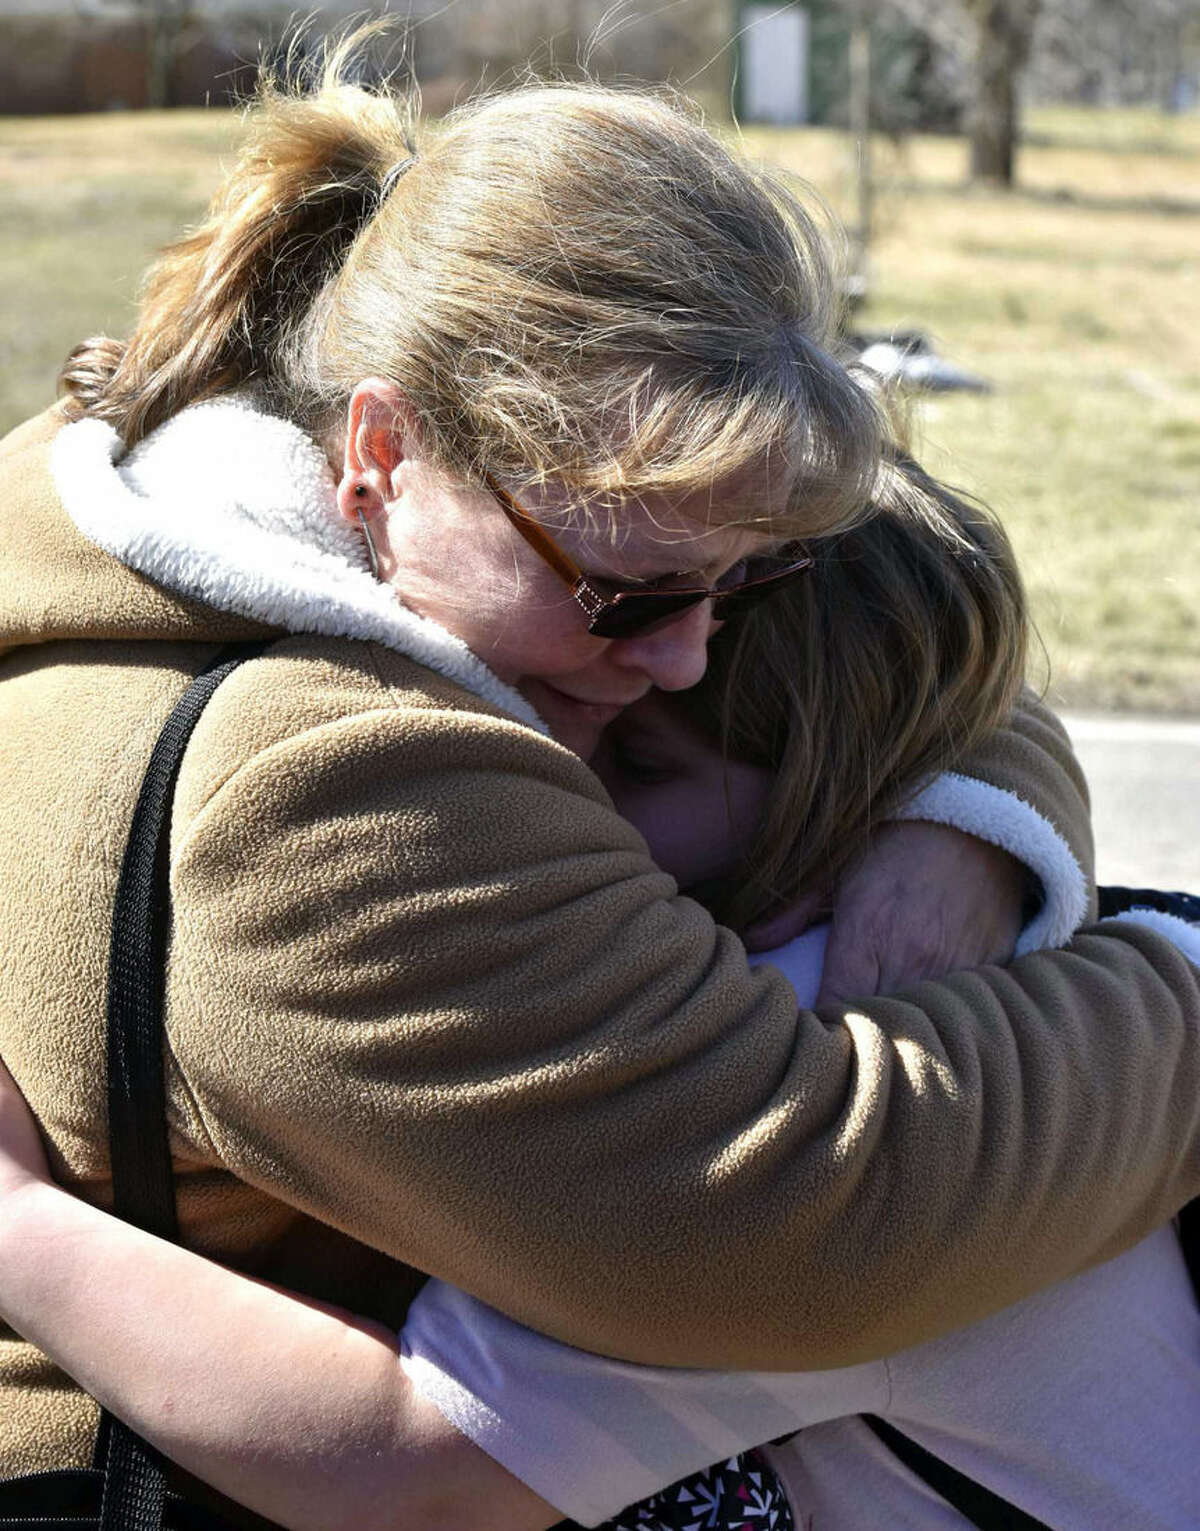 A child is comforted Monday, Feb. 29, 2016, near Middletown, Ohio after a school shooting at Madison Local Schools. An Ohio sheriff says a 14-year-old suspect in a school shooting that wounded four classmates, including two who were shot, is in a juvenile lock-up and facing several charges. Butler County Sheriff Richard Jones says the boy has been charged with two counts of attempted murder, two counts of felonious assault, inducing panic and making terrorist threats. (Nick Graham/Dayton Daily News via AP)